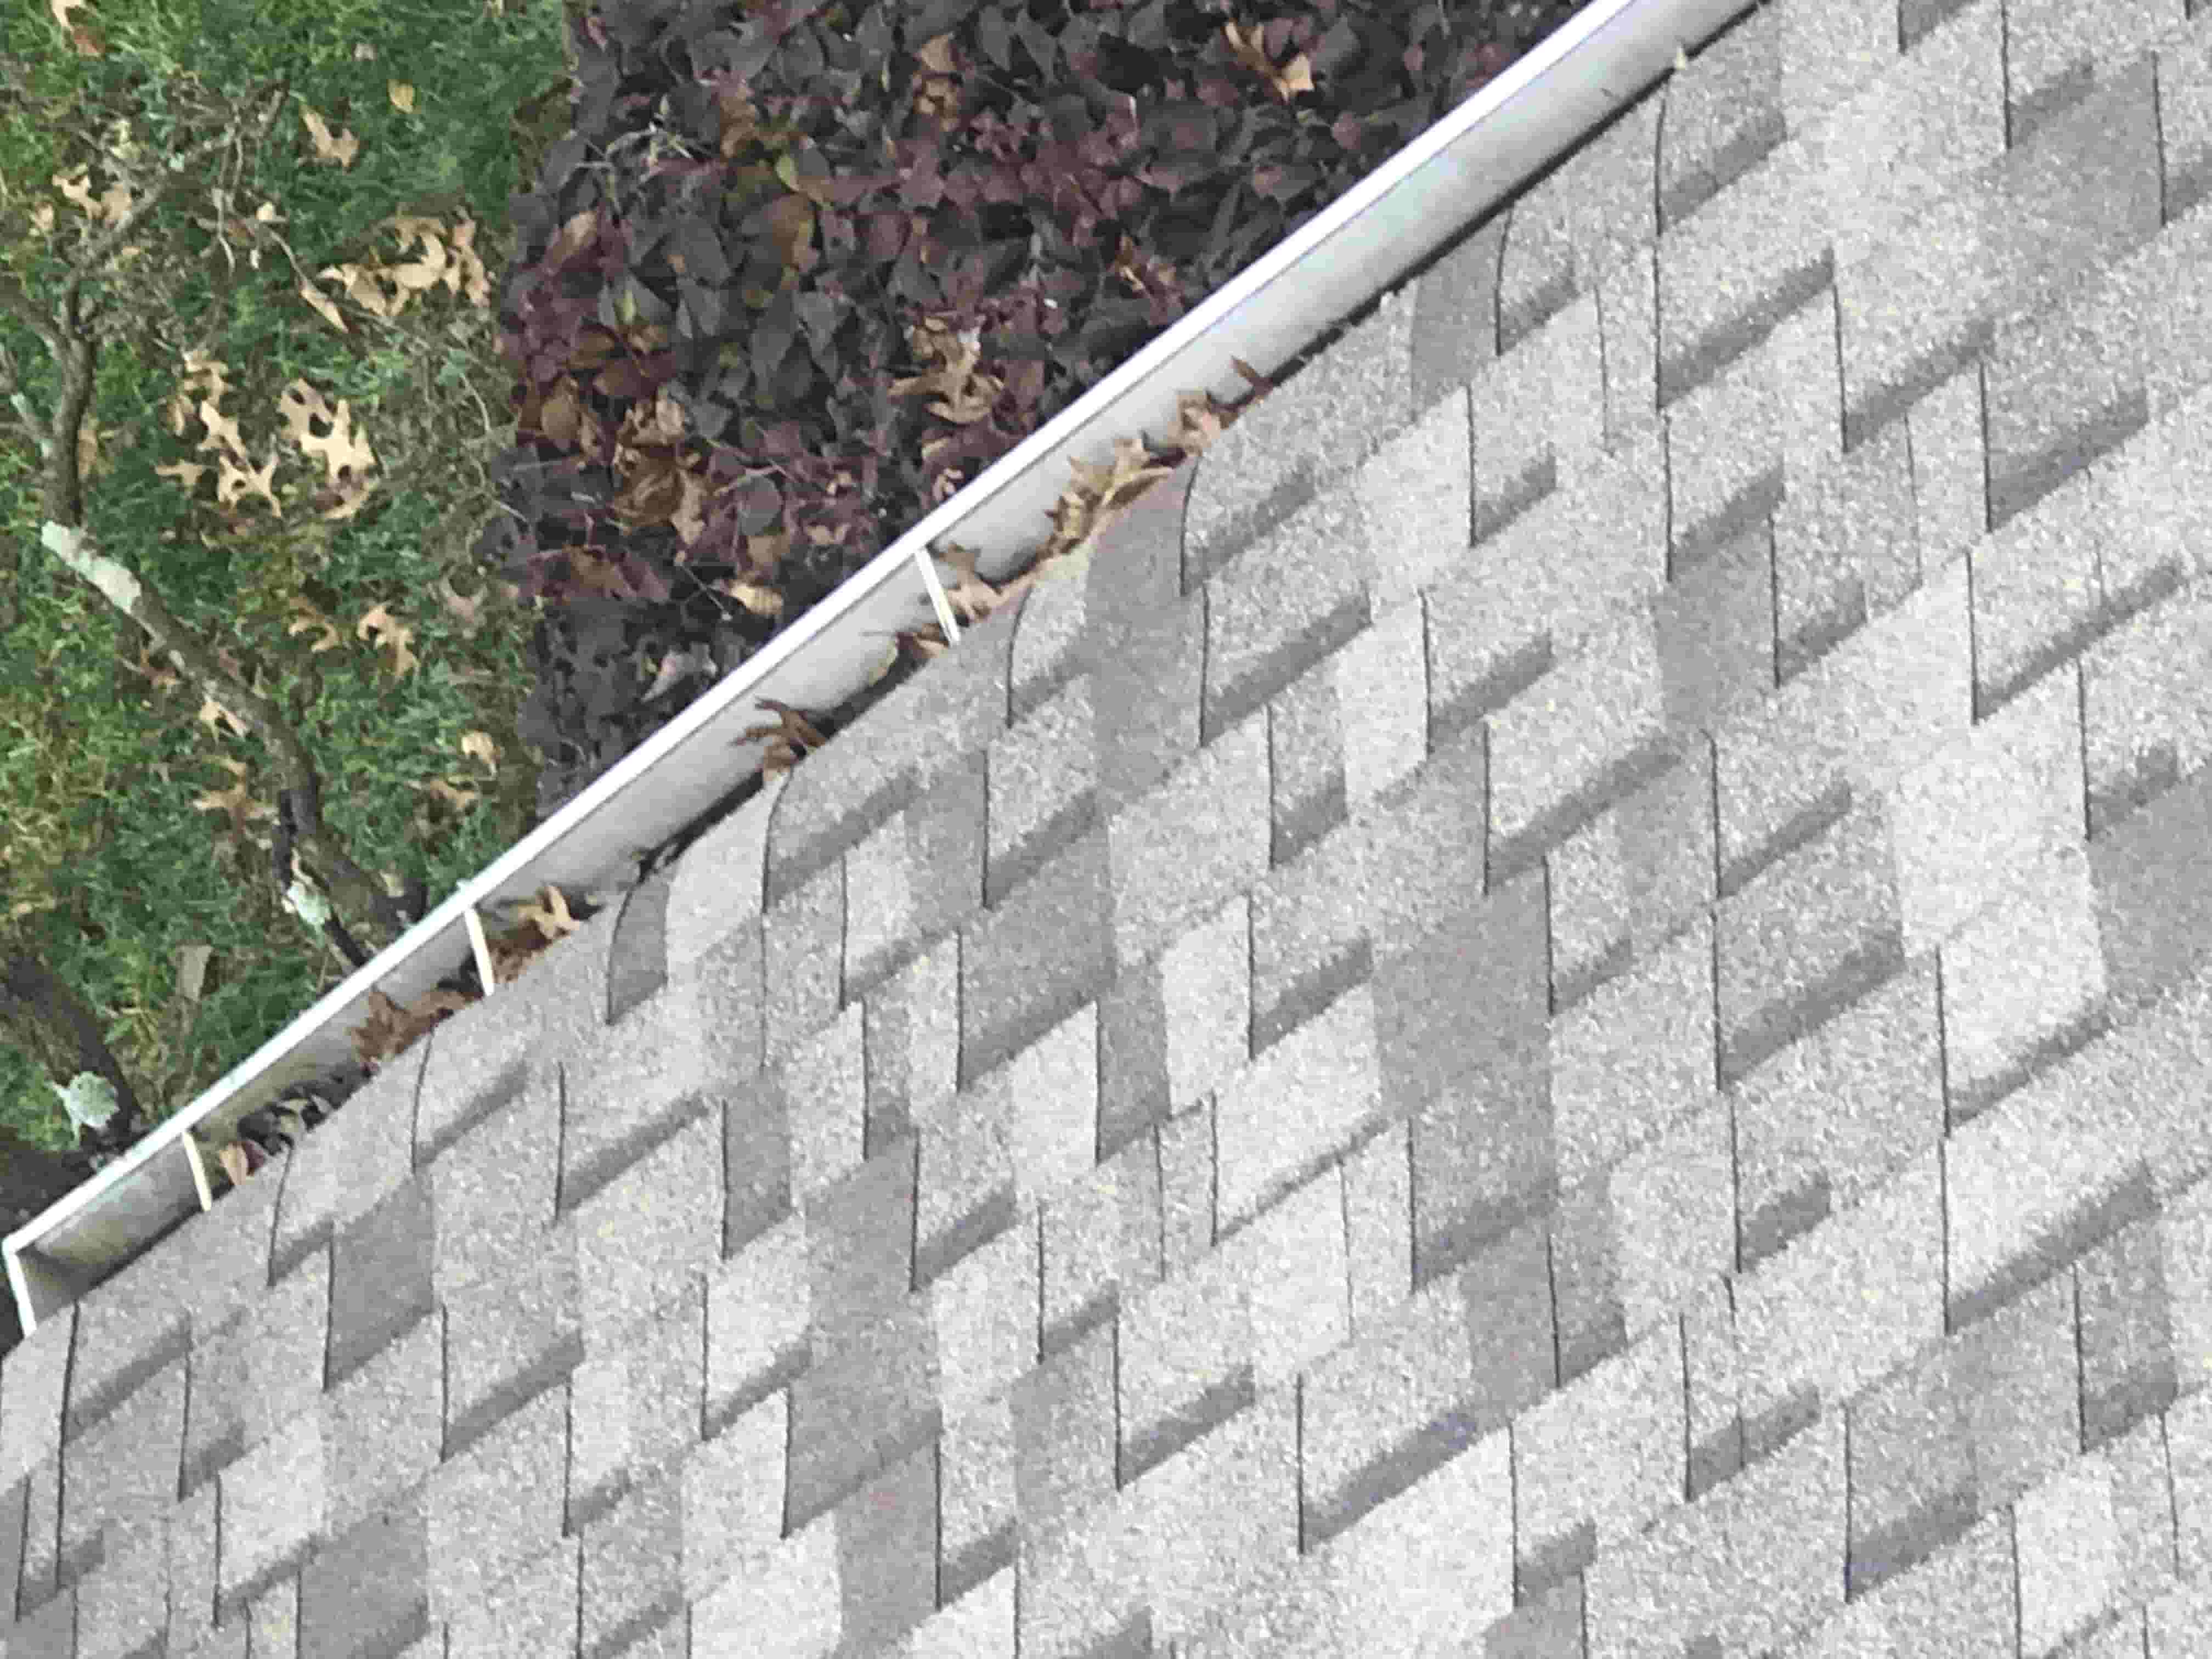 gutter cleaning service near me